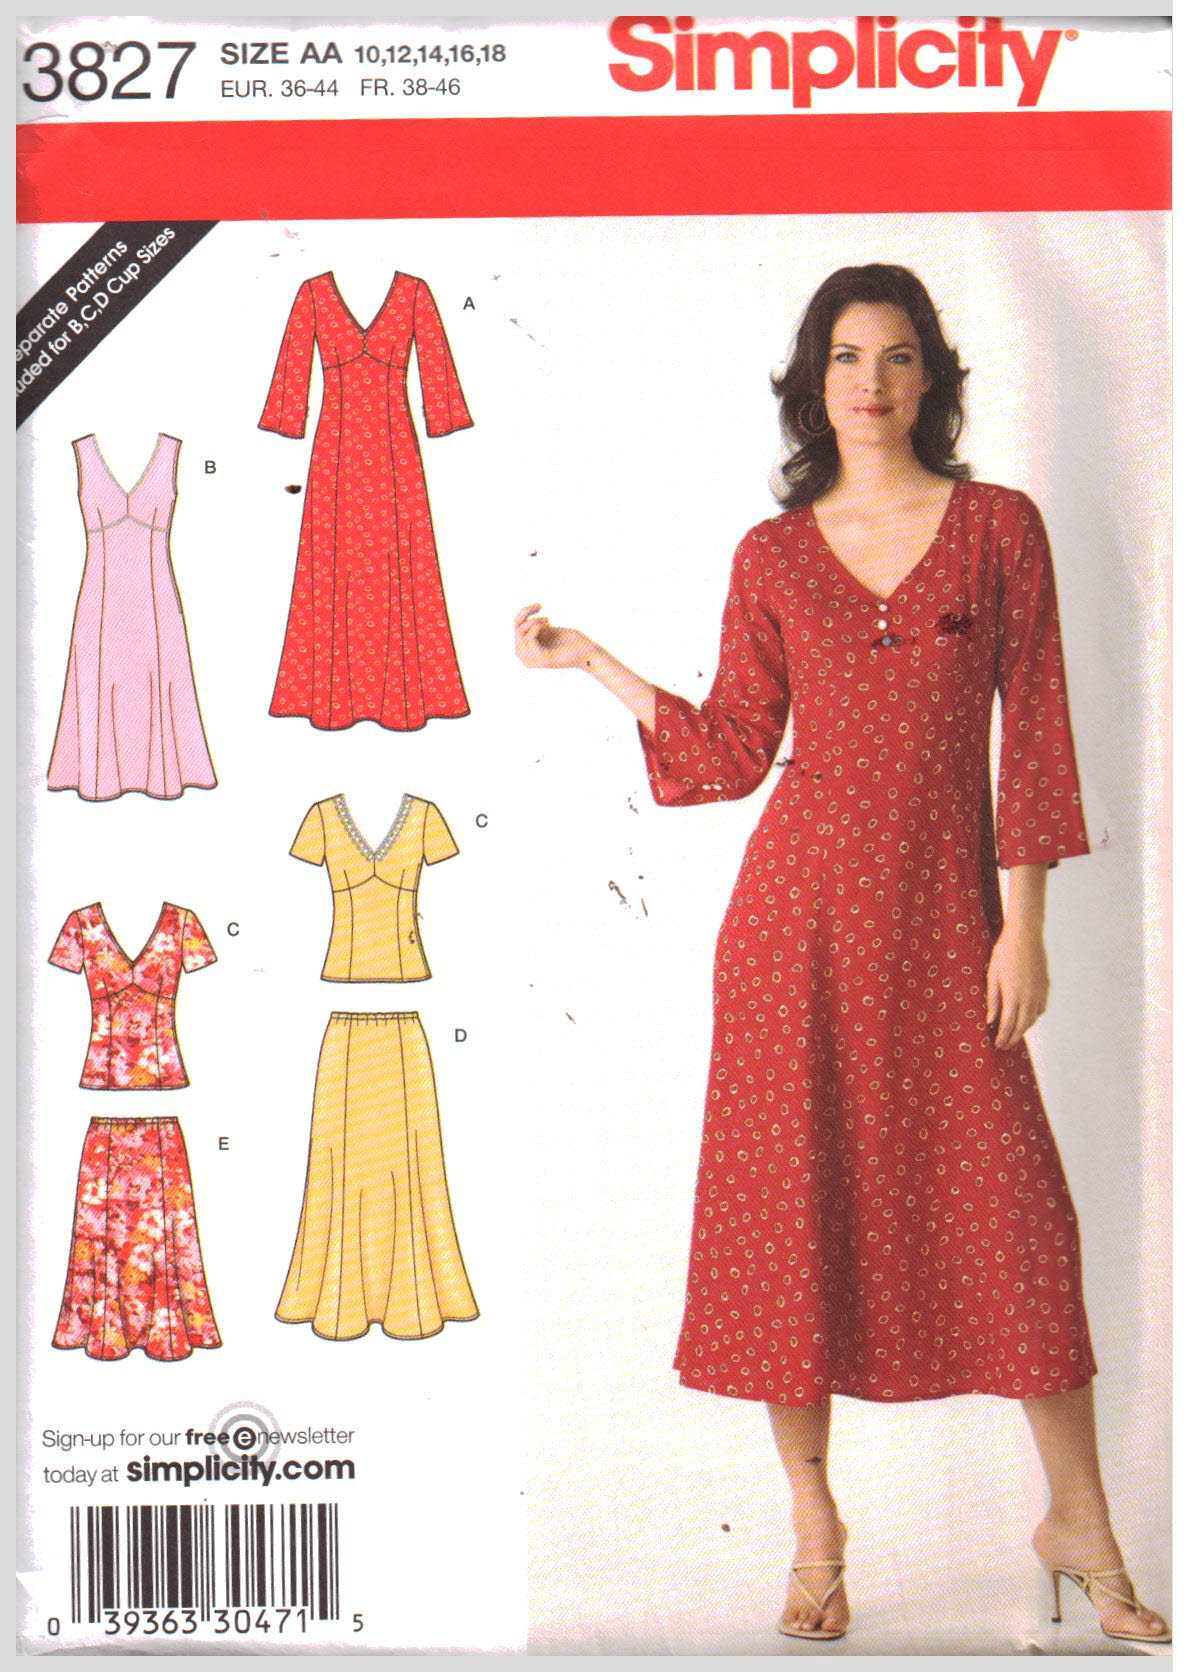 Nehru Collar & Flared Skirt or Two-Piece Dress Simplicity 7350 Extended Shoulders Size 12 1970s A-Line Dress or Top with Front Tucks